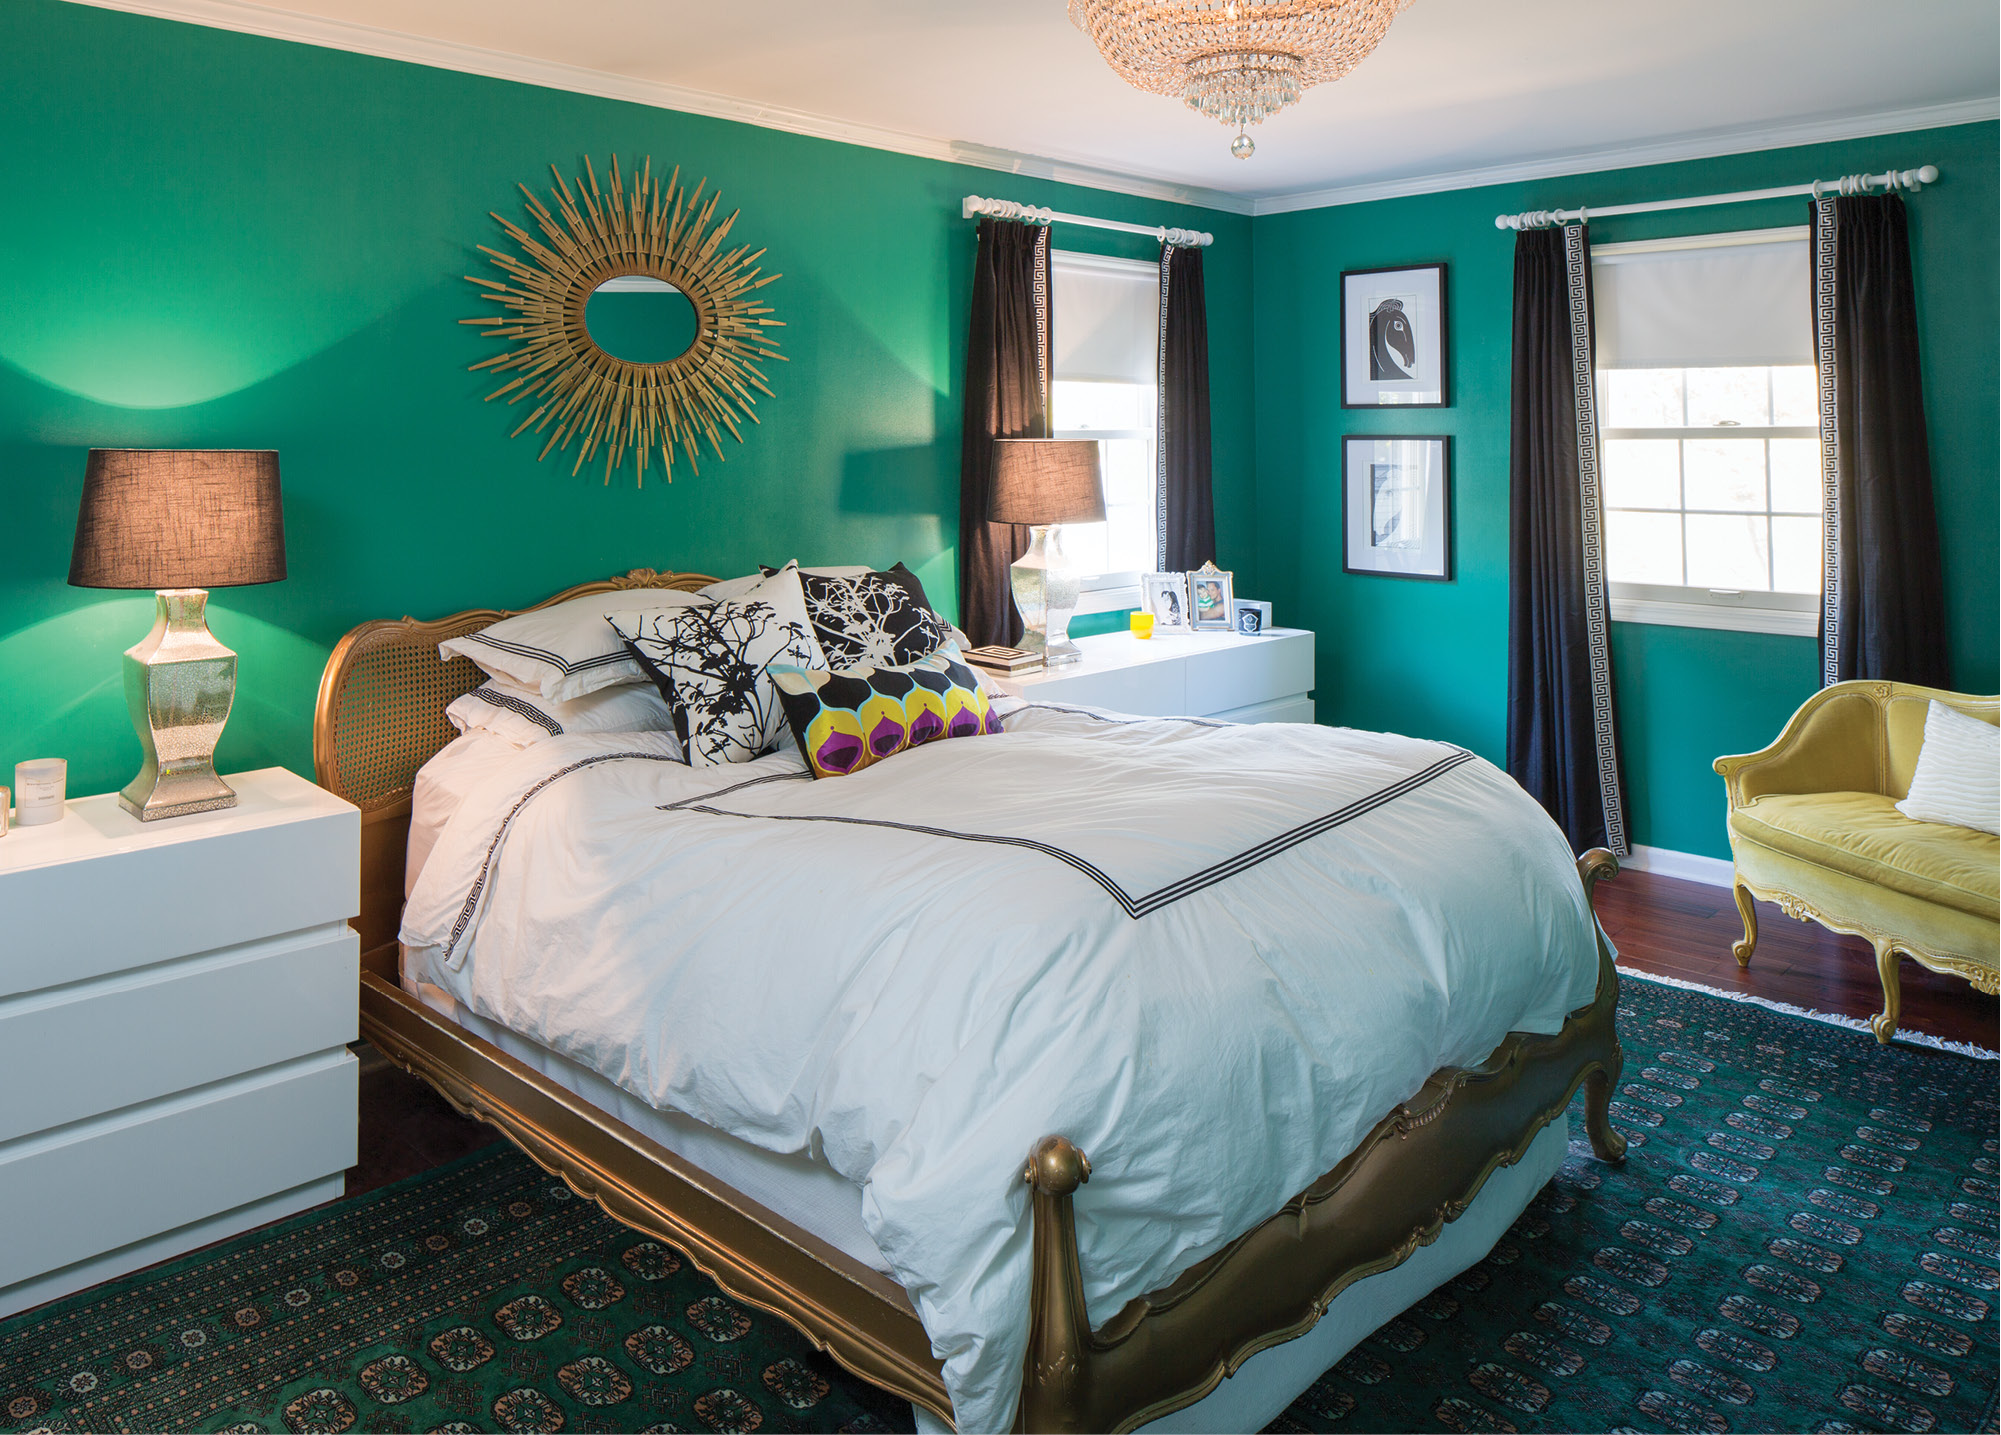 50+ Beautiful Paint Colors for Bedrooms 2017 - RoundPulse